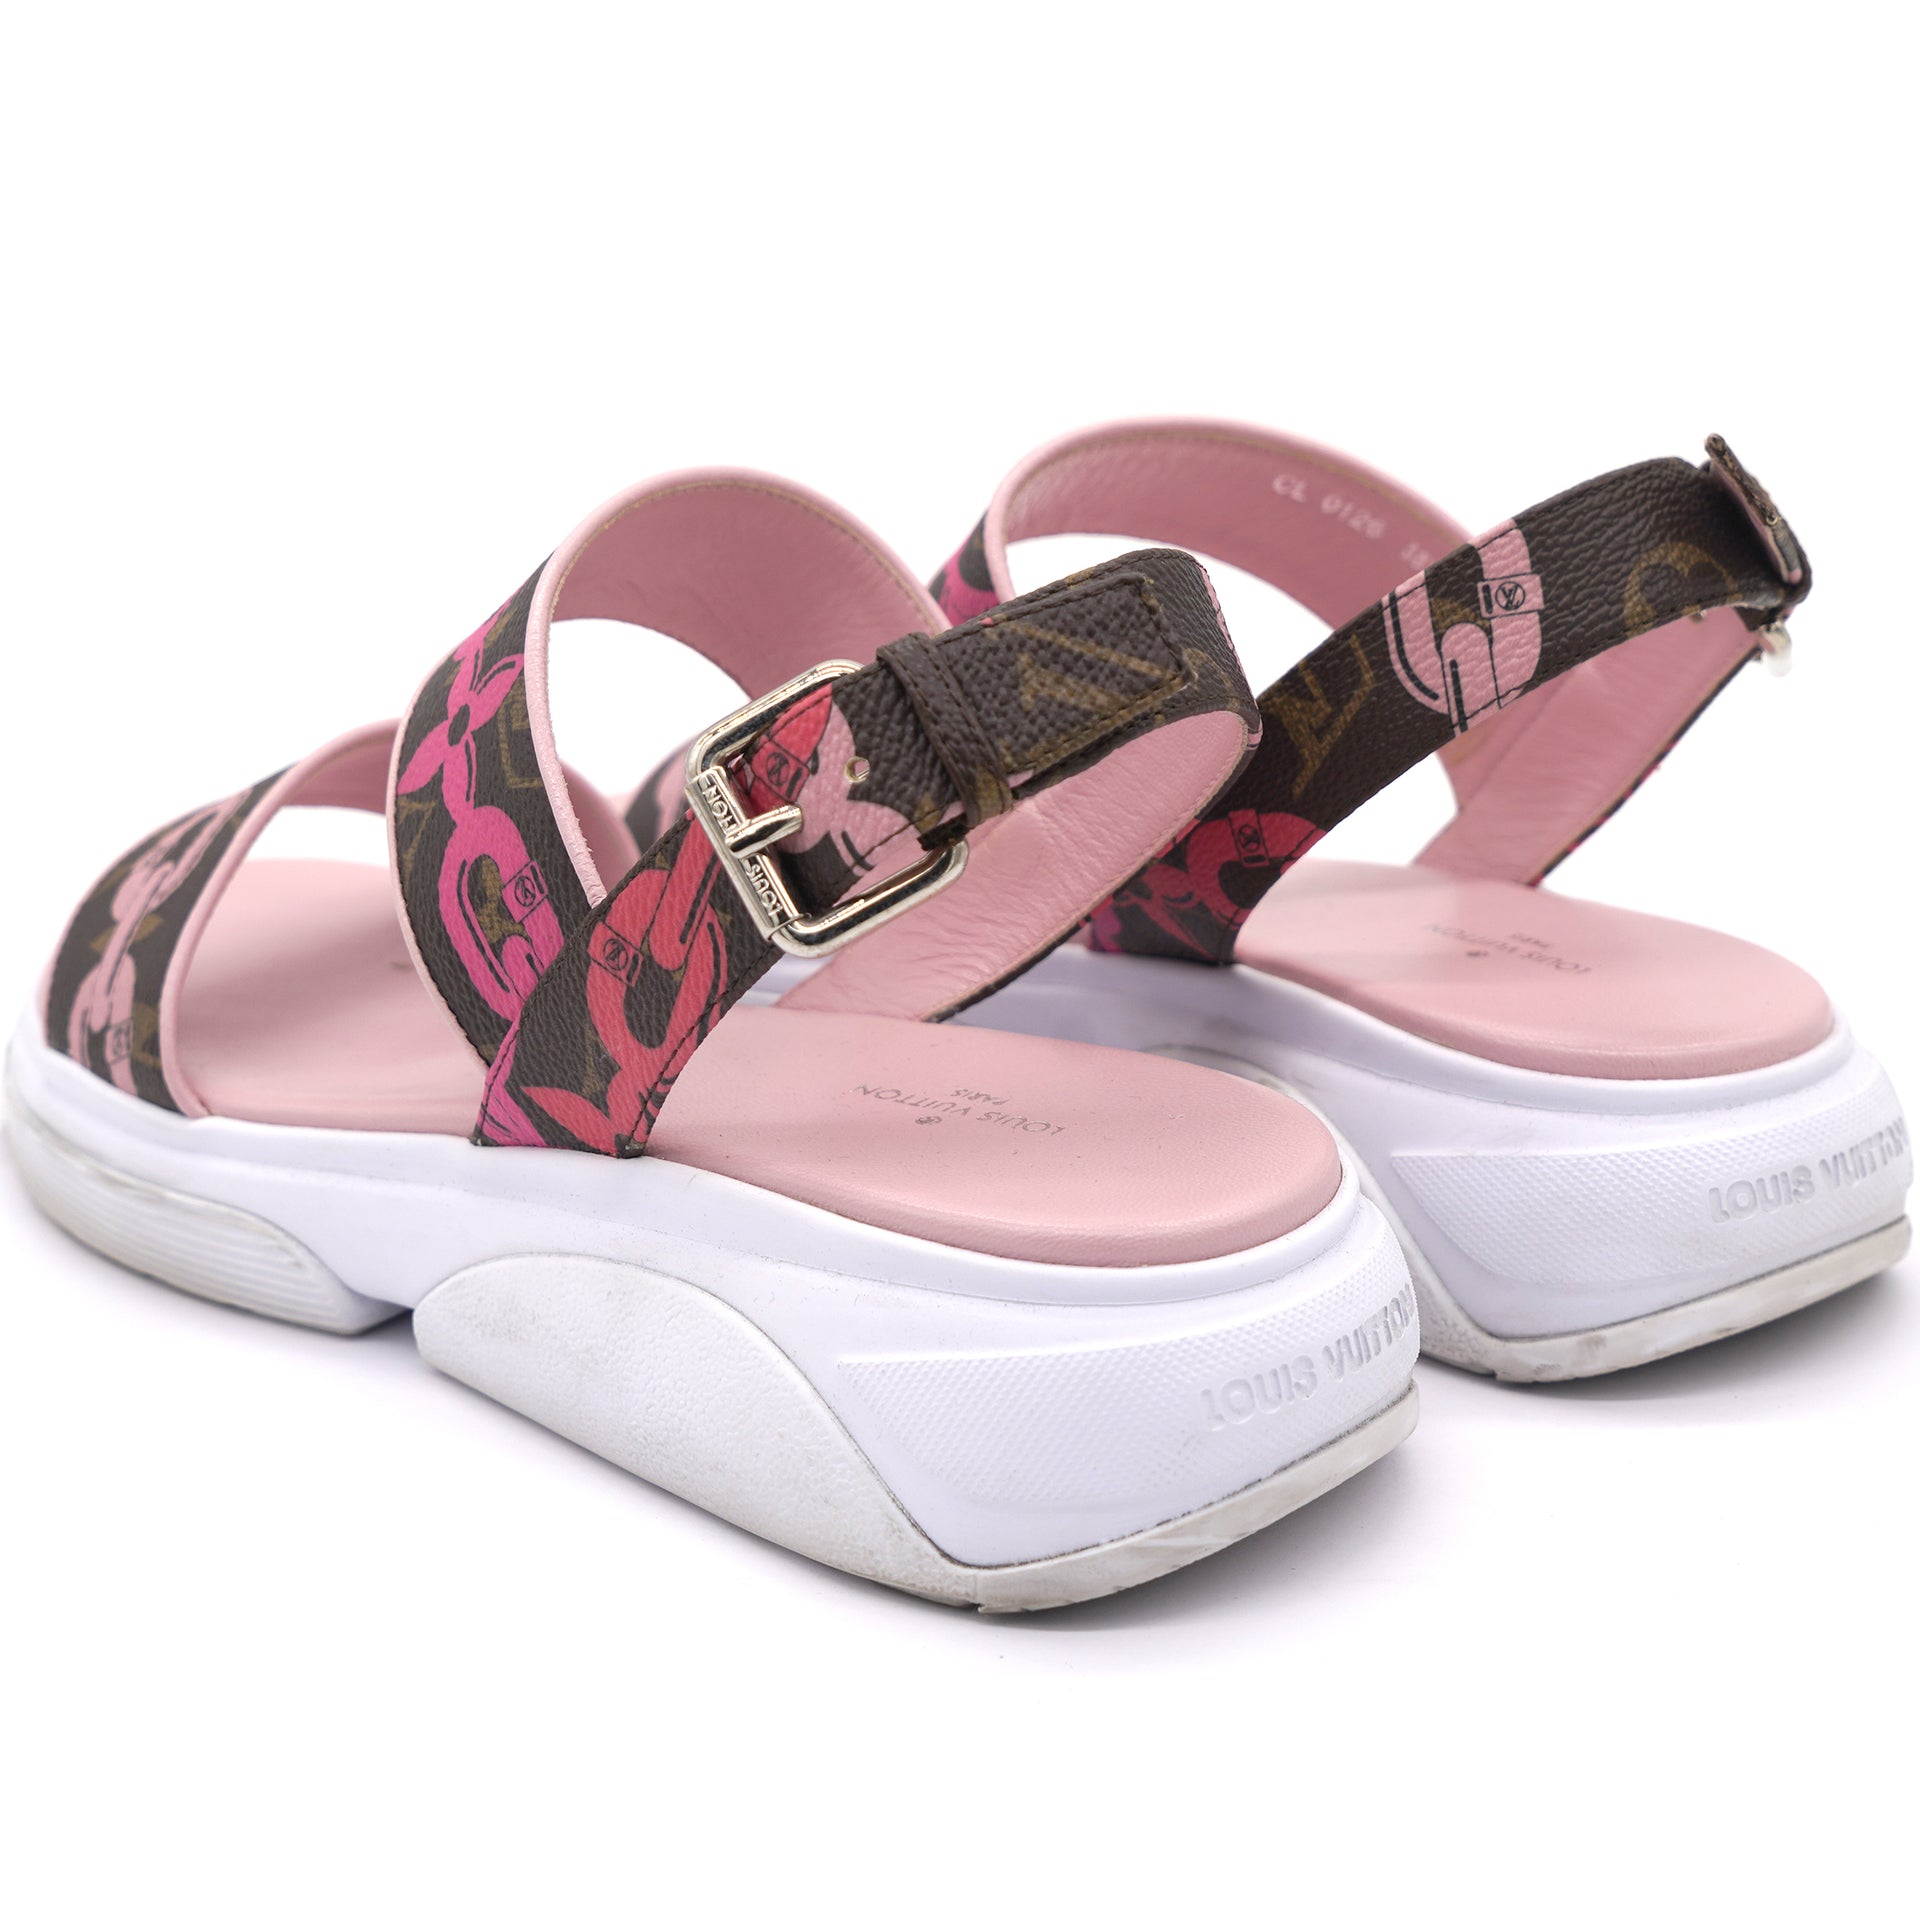 Louis Vuitton - Authenticated Sandal - Rubber Pink for Women, Very Good Condition